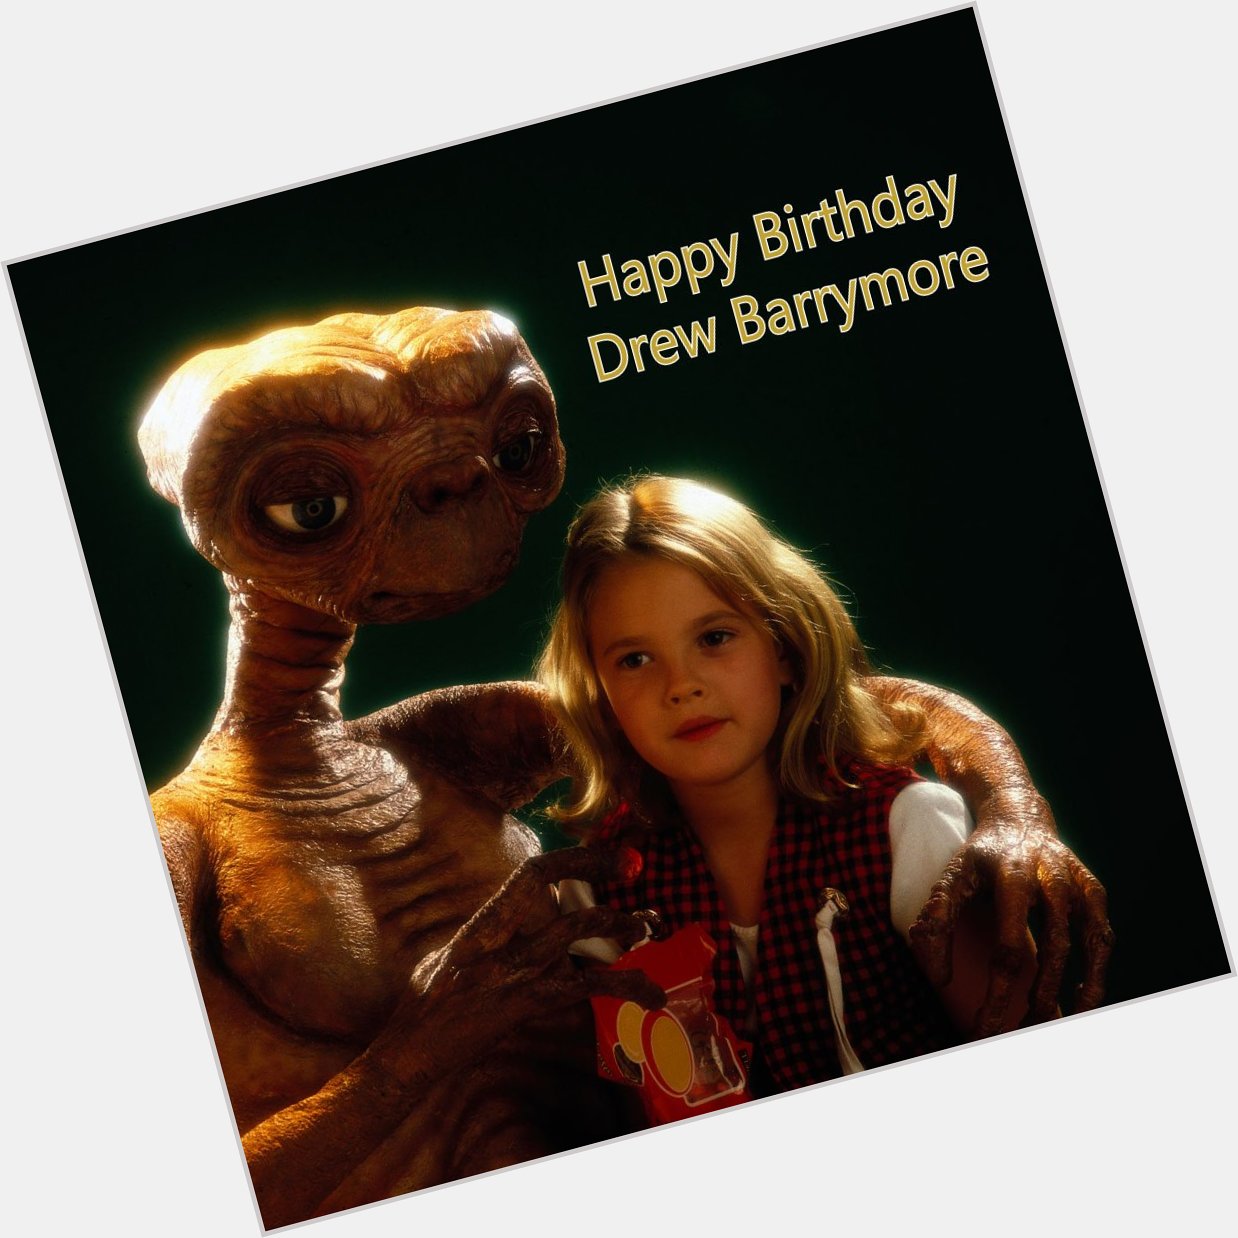 Happy birthday, Drew Barrymore! We hope you have a birthday worth phoning home about! 